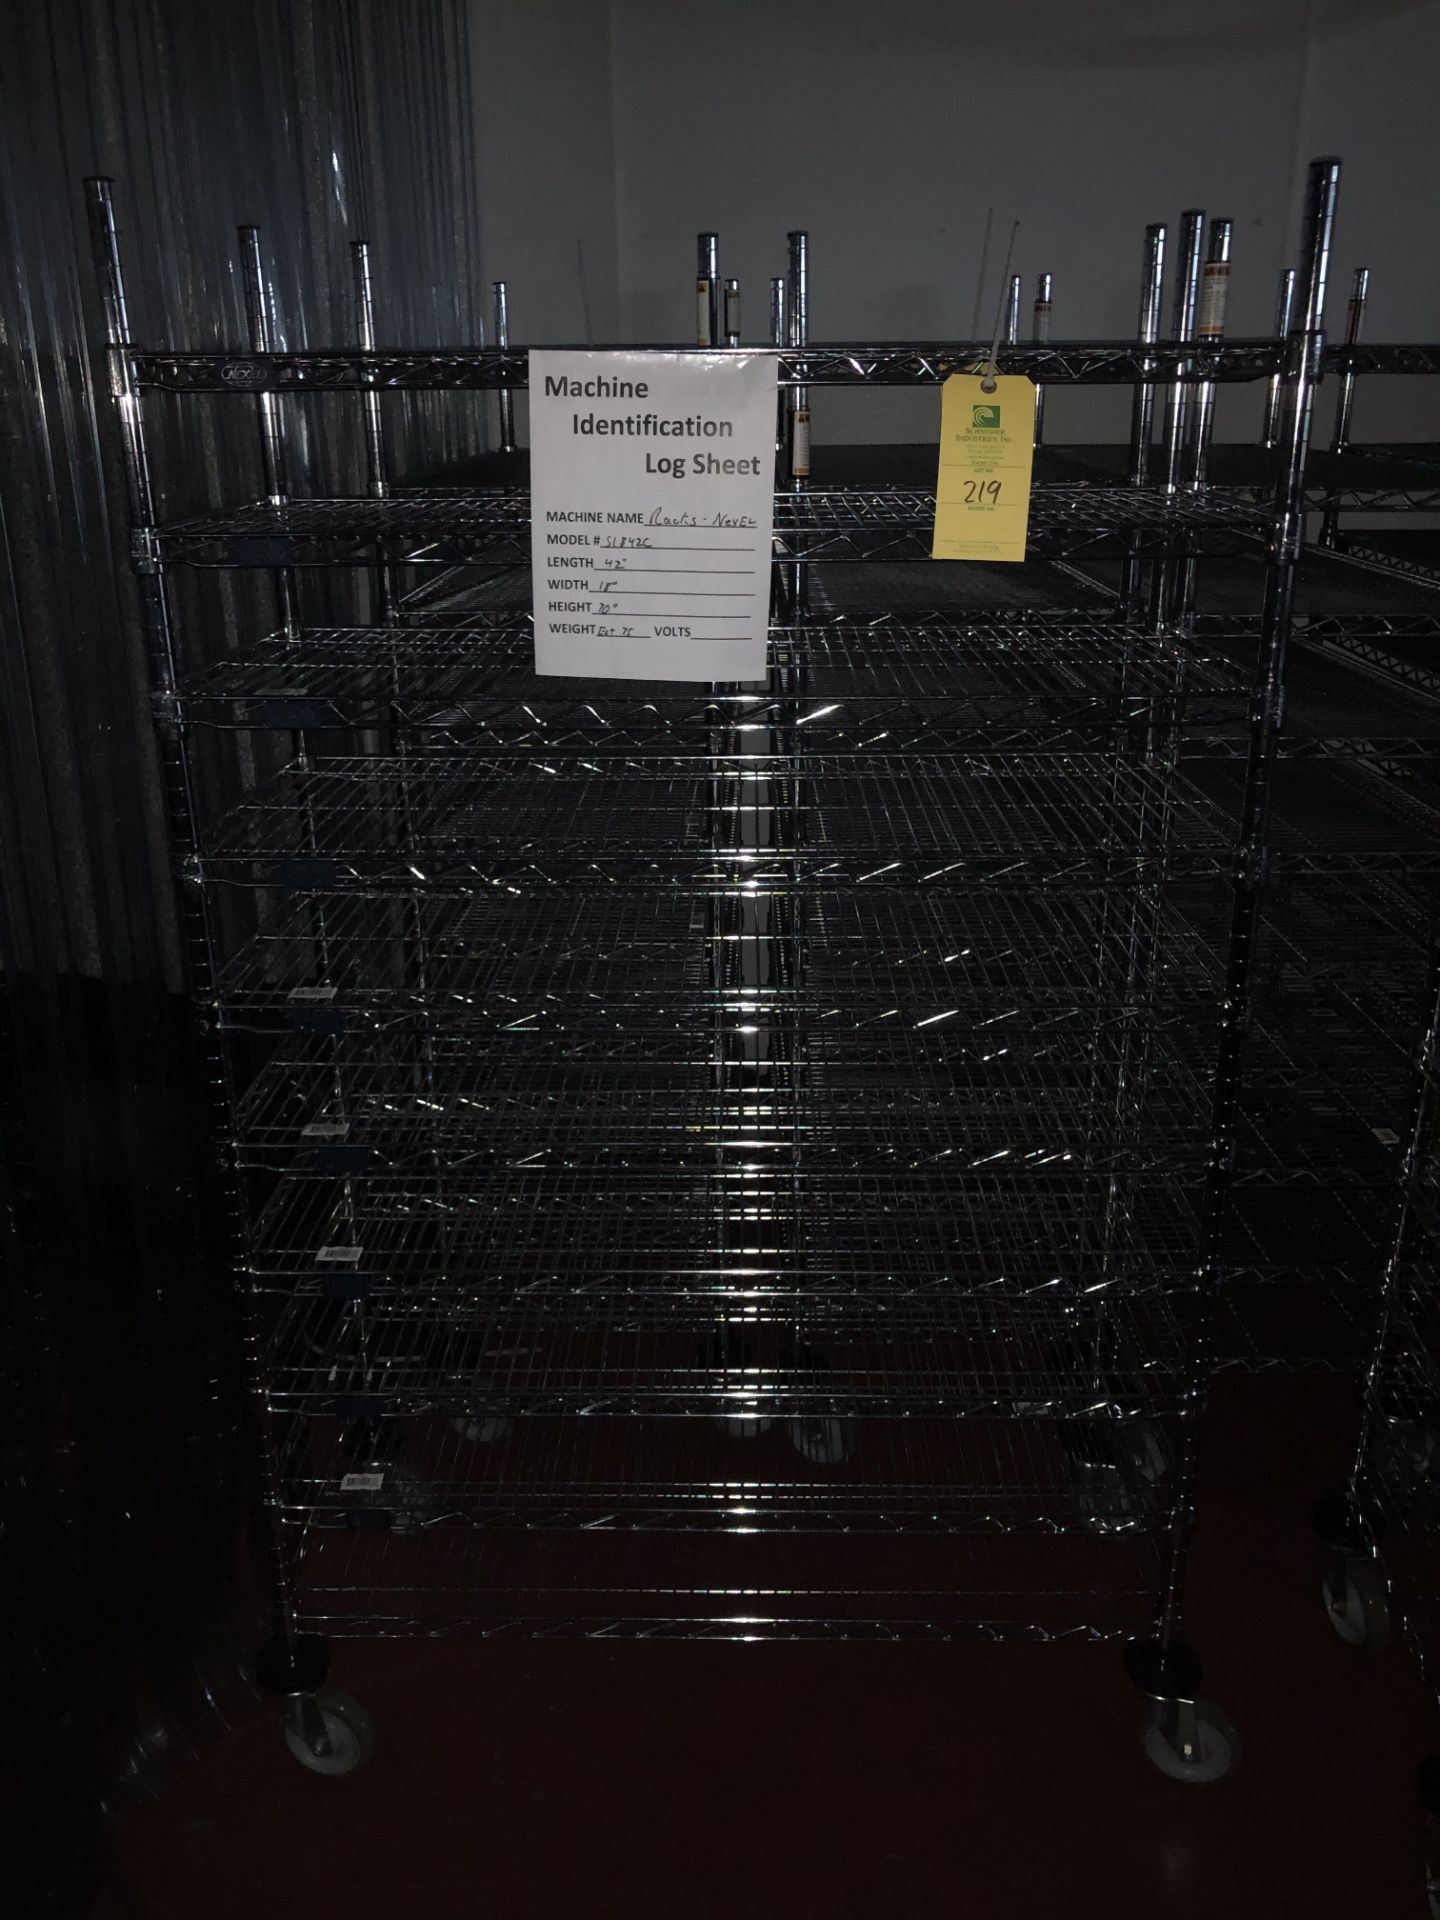 Stainless Steel Rack, L = 42'', W = 18'', H = 70''